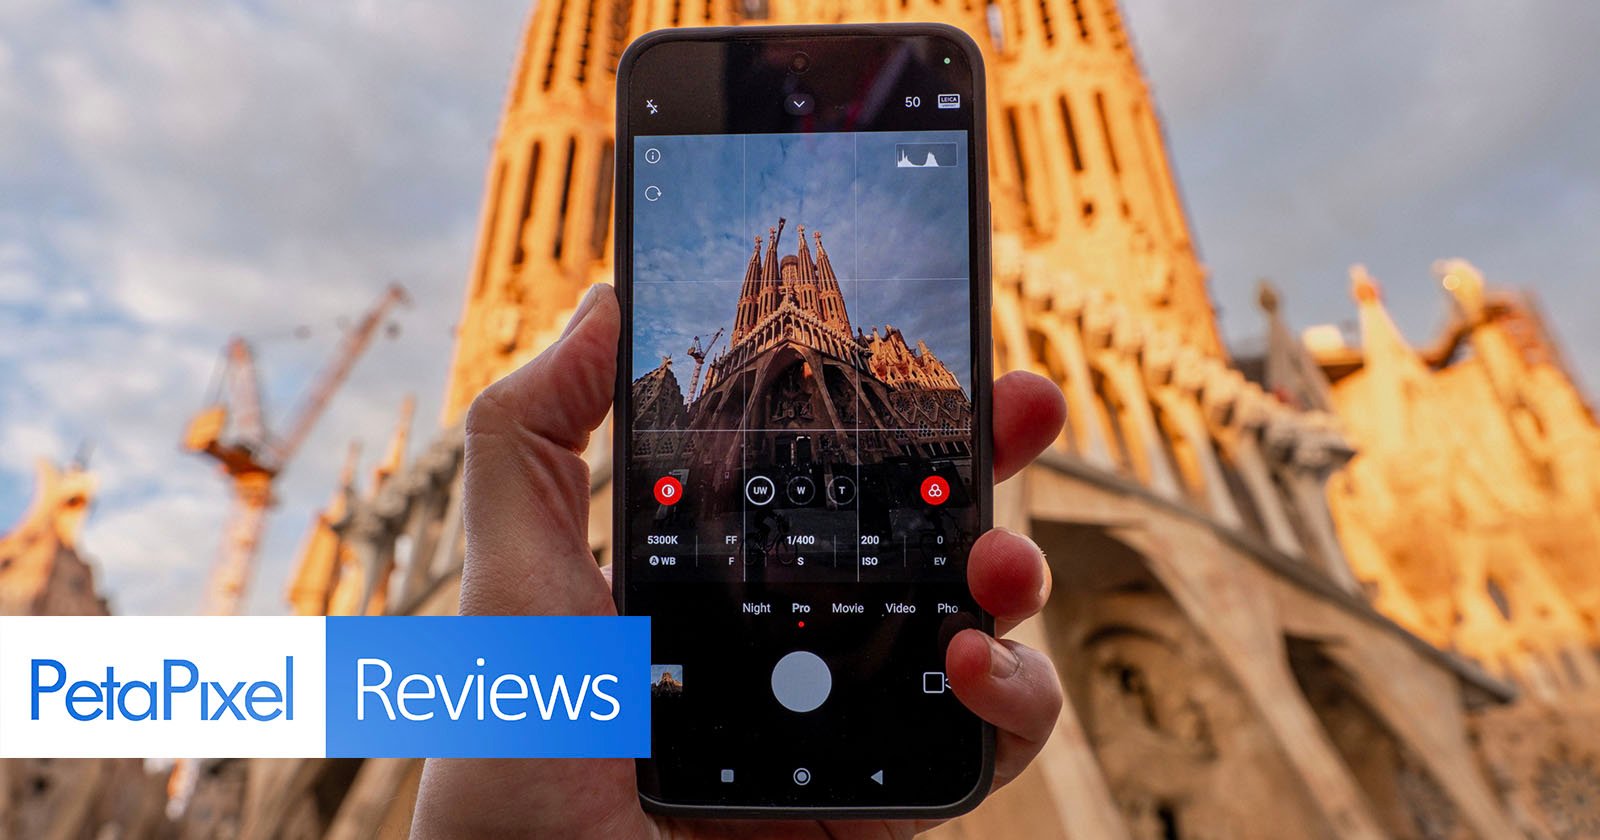  xiaomi review excellent powerful choice small phone 